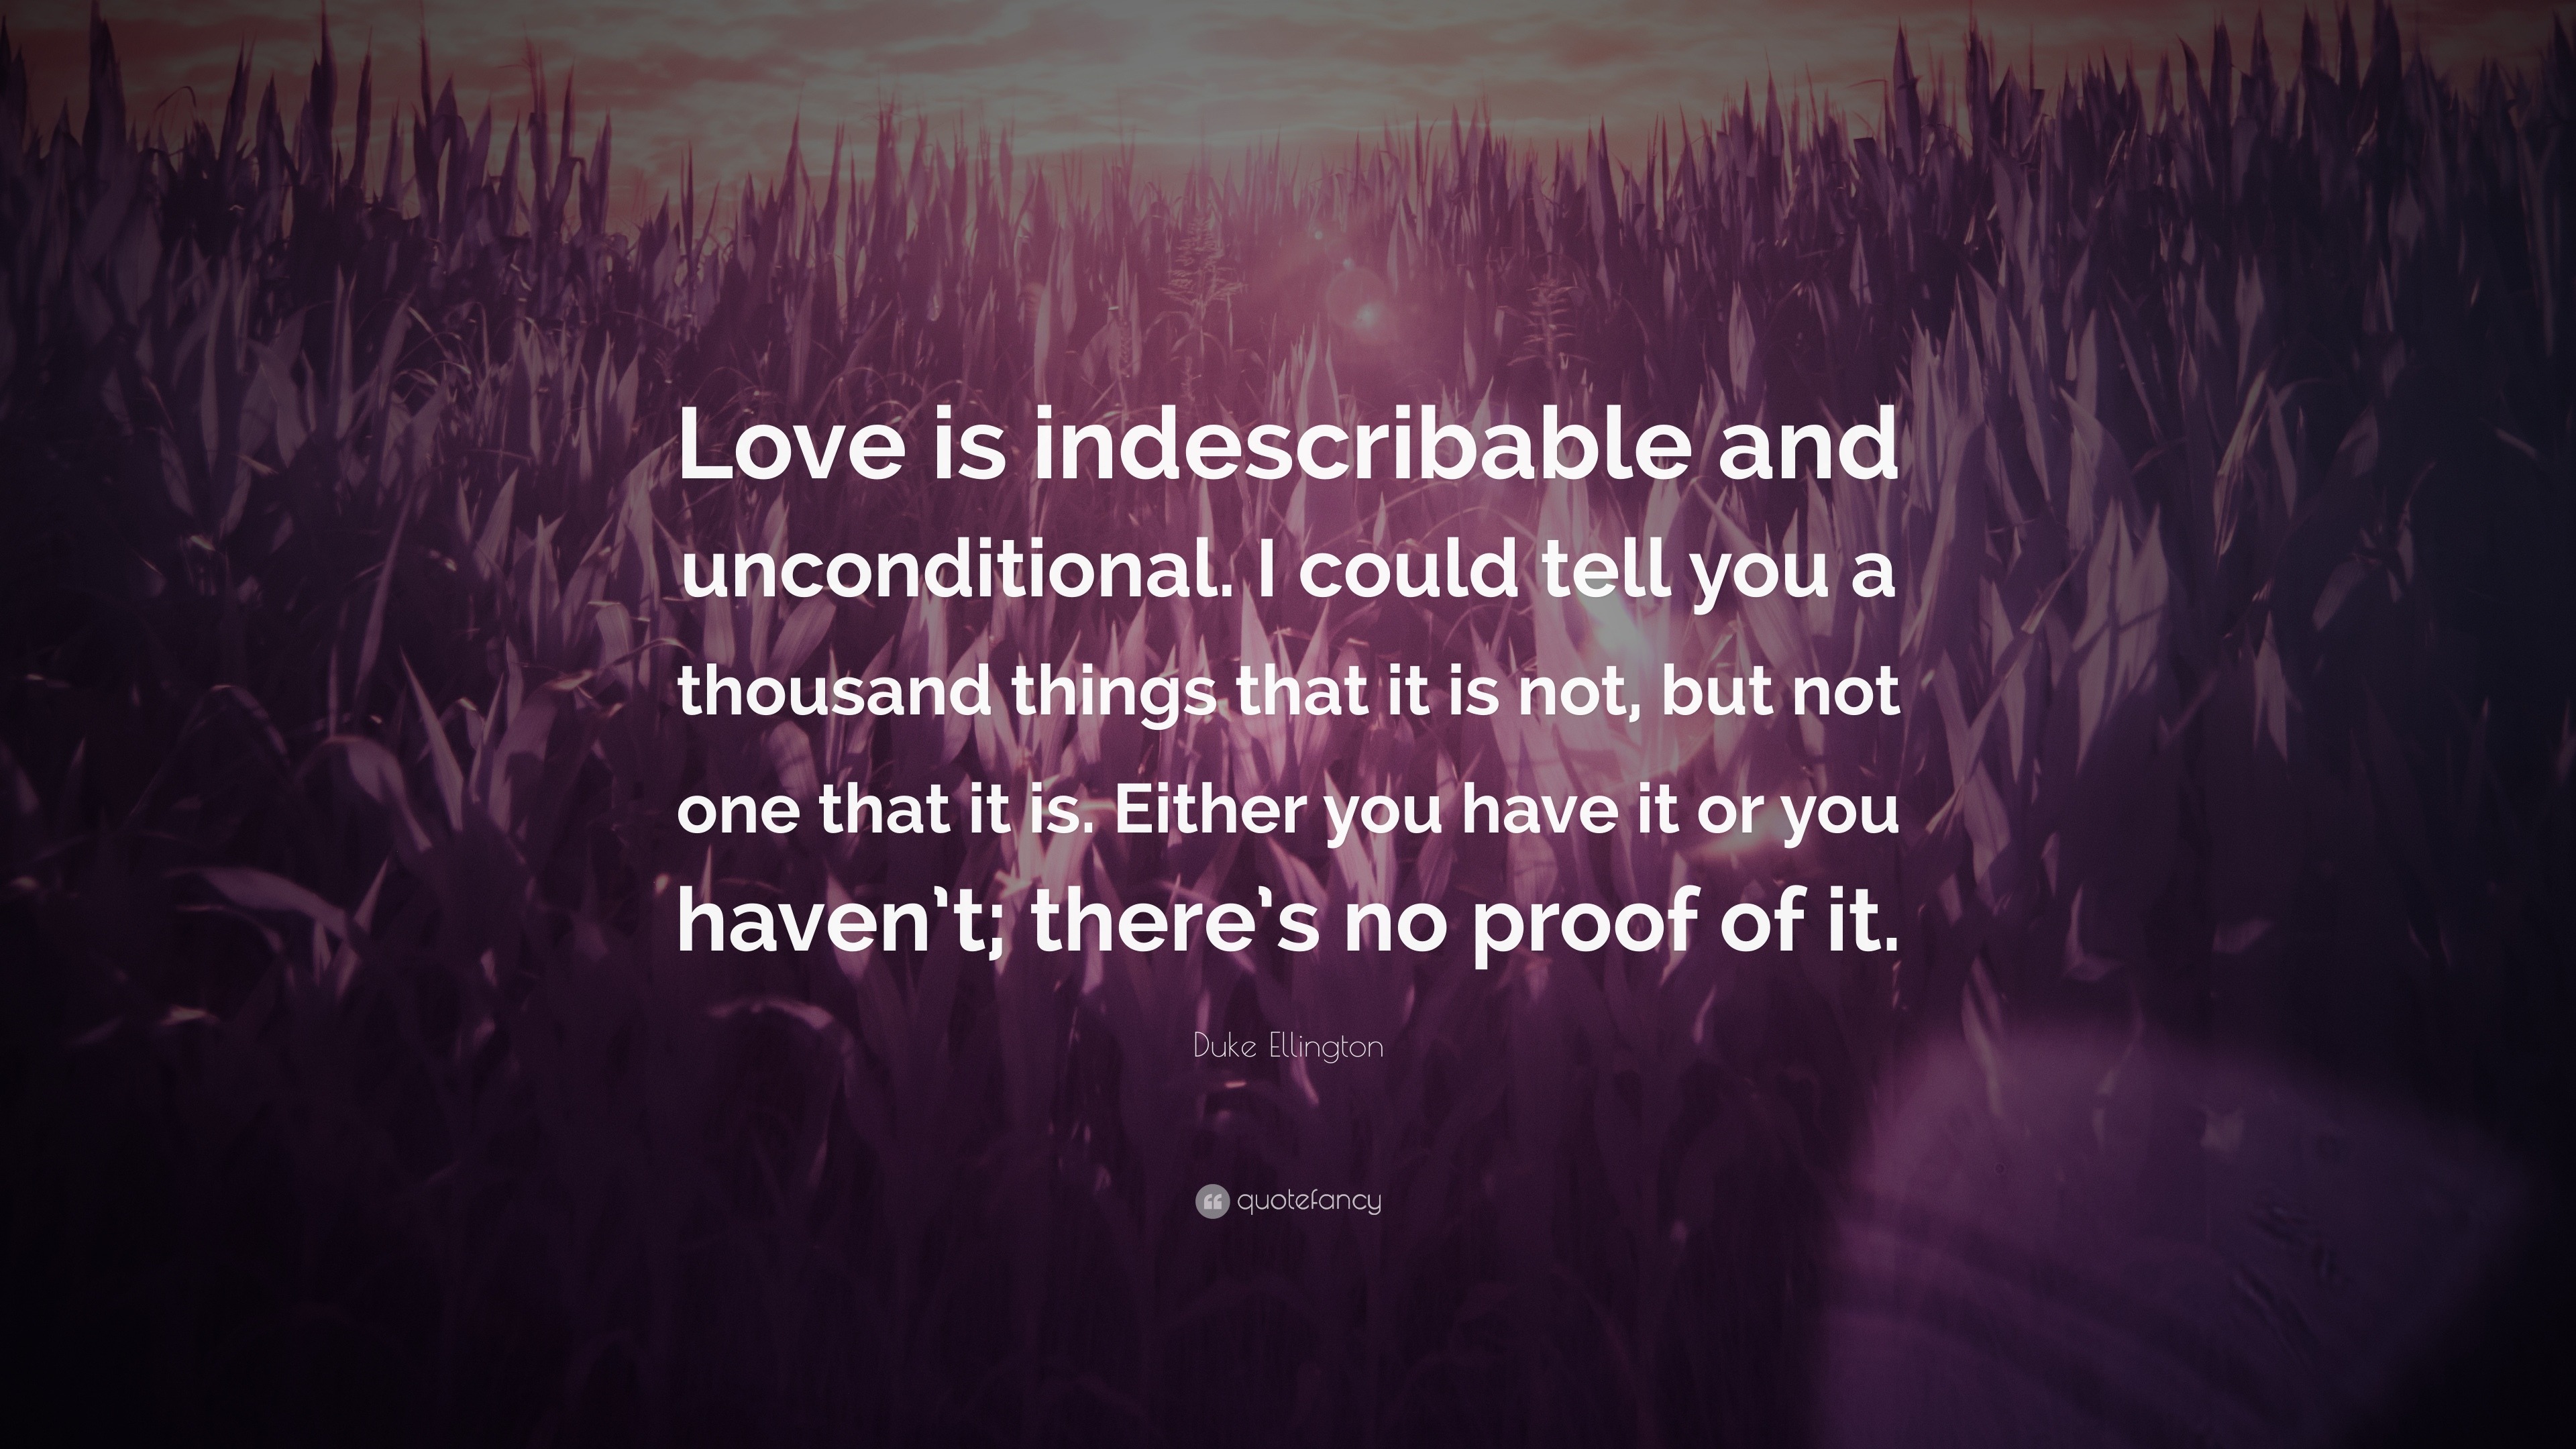 Duke Ellington Quote: “Love is indescribable and unconditional. I could ...